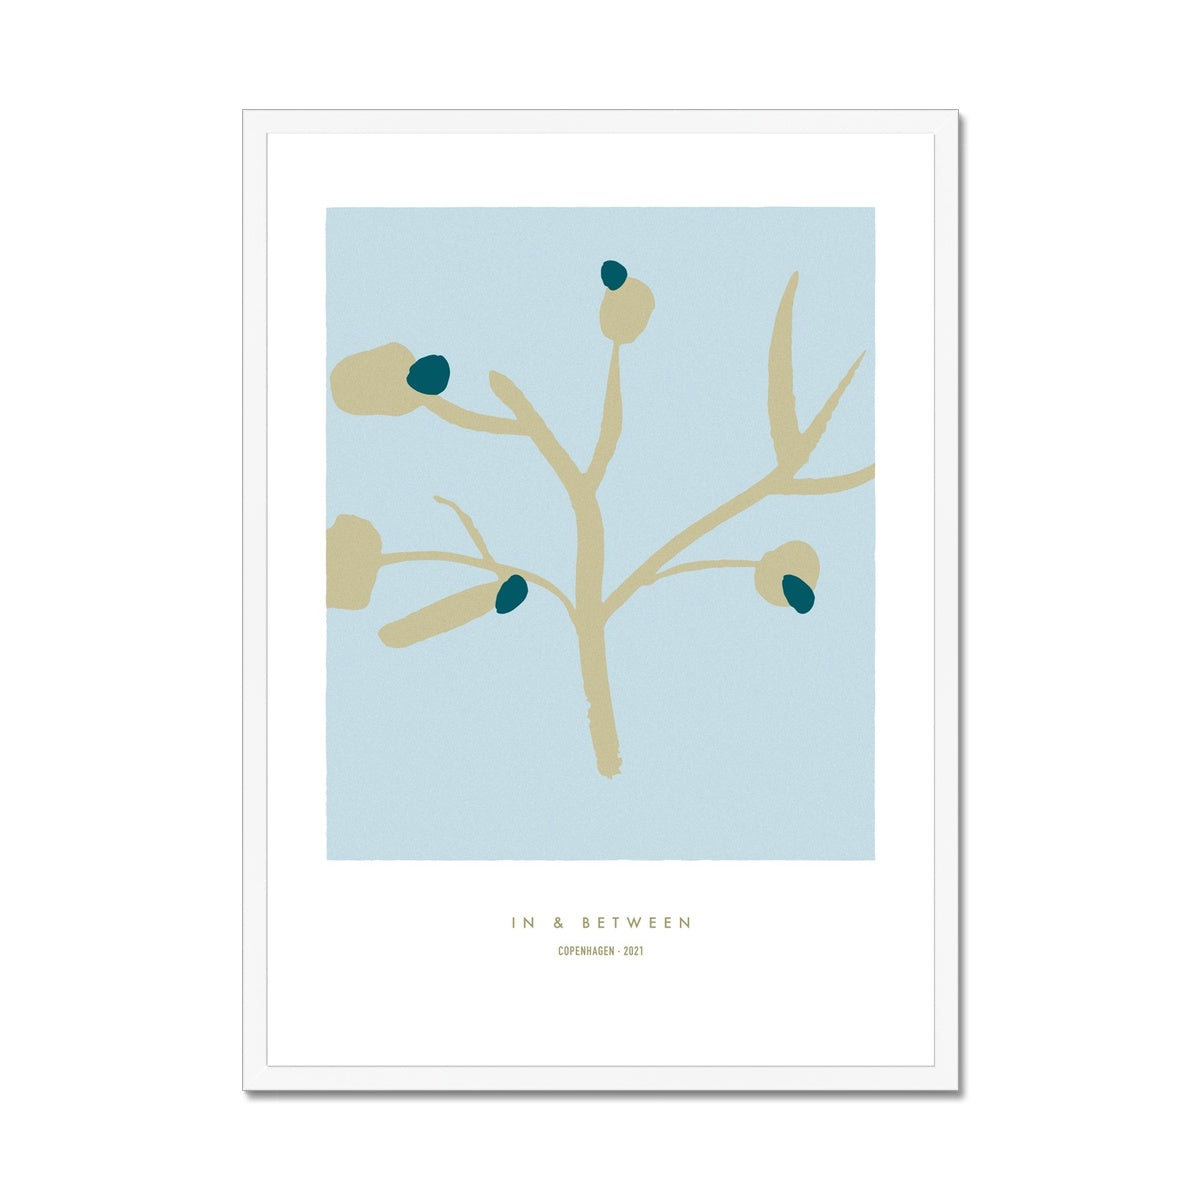 Upright golden olive tree branch with dark green olives on a light blue background in a white wooden frame.